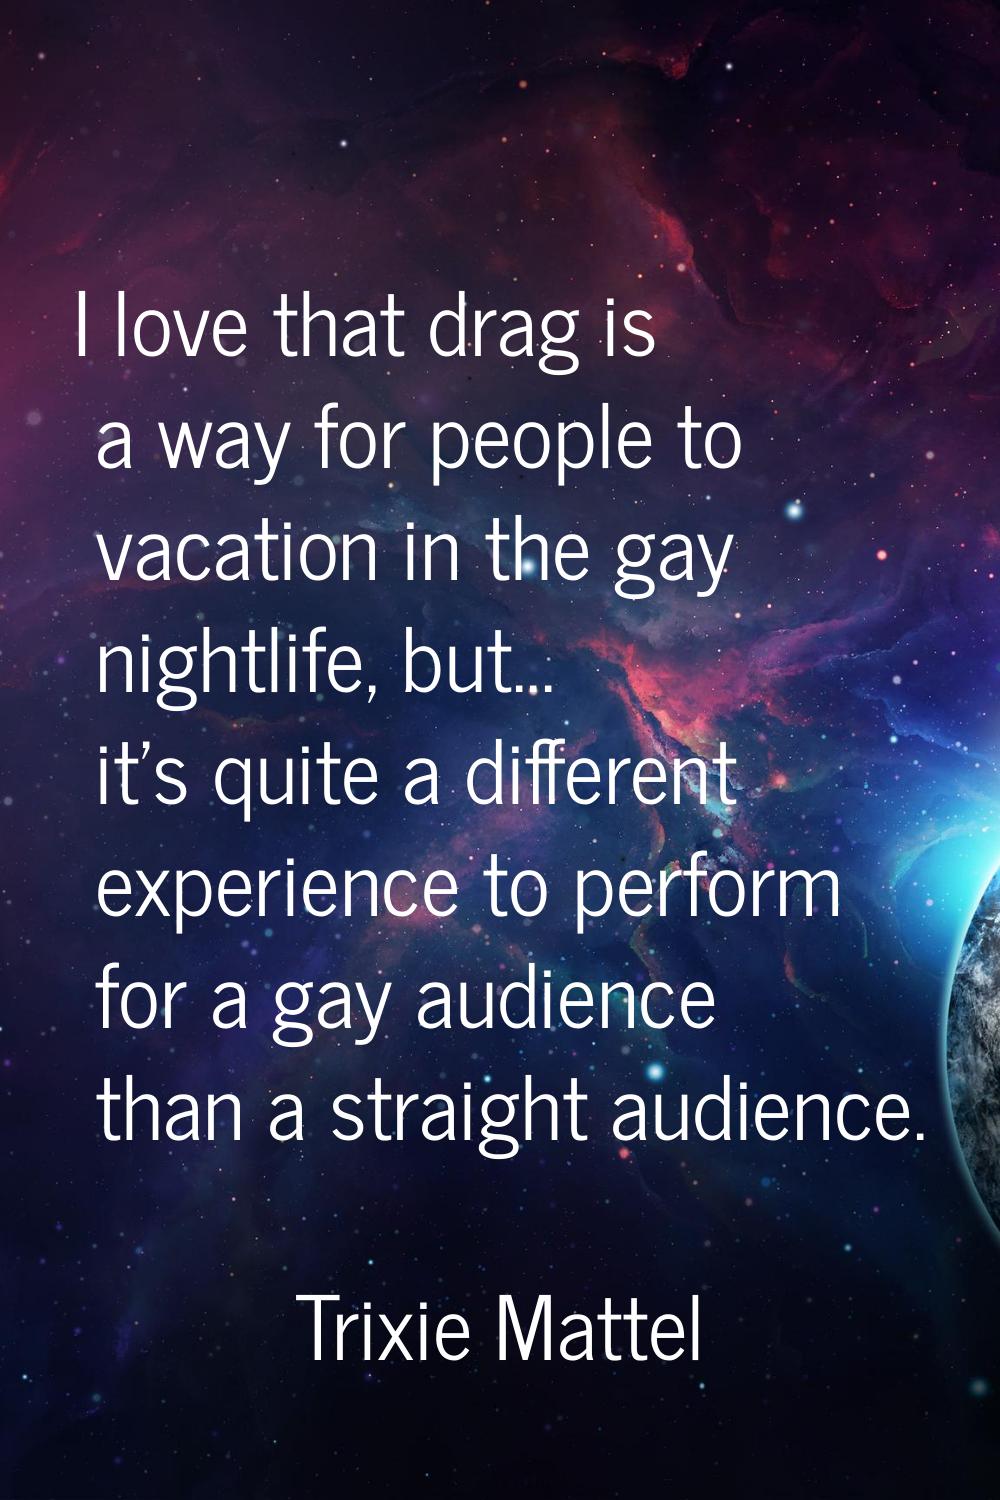 I love that drag is a way for people to vacation in the gay nightlife, but... it's quite a differen